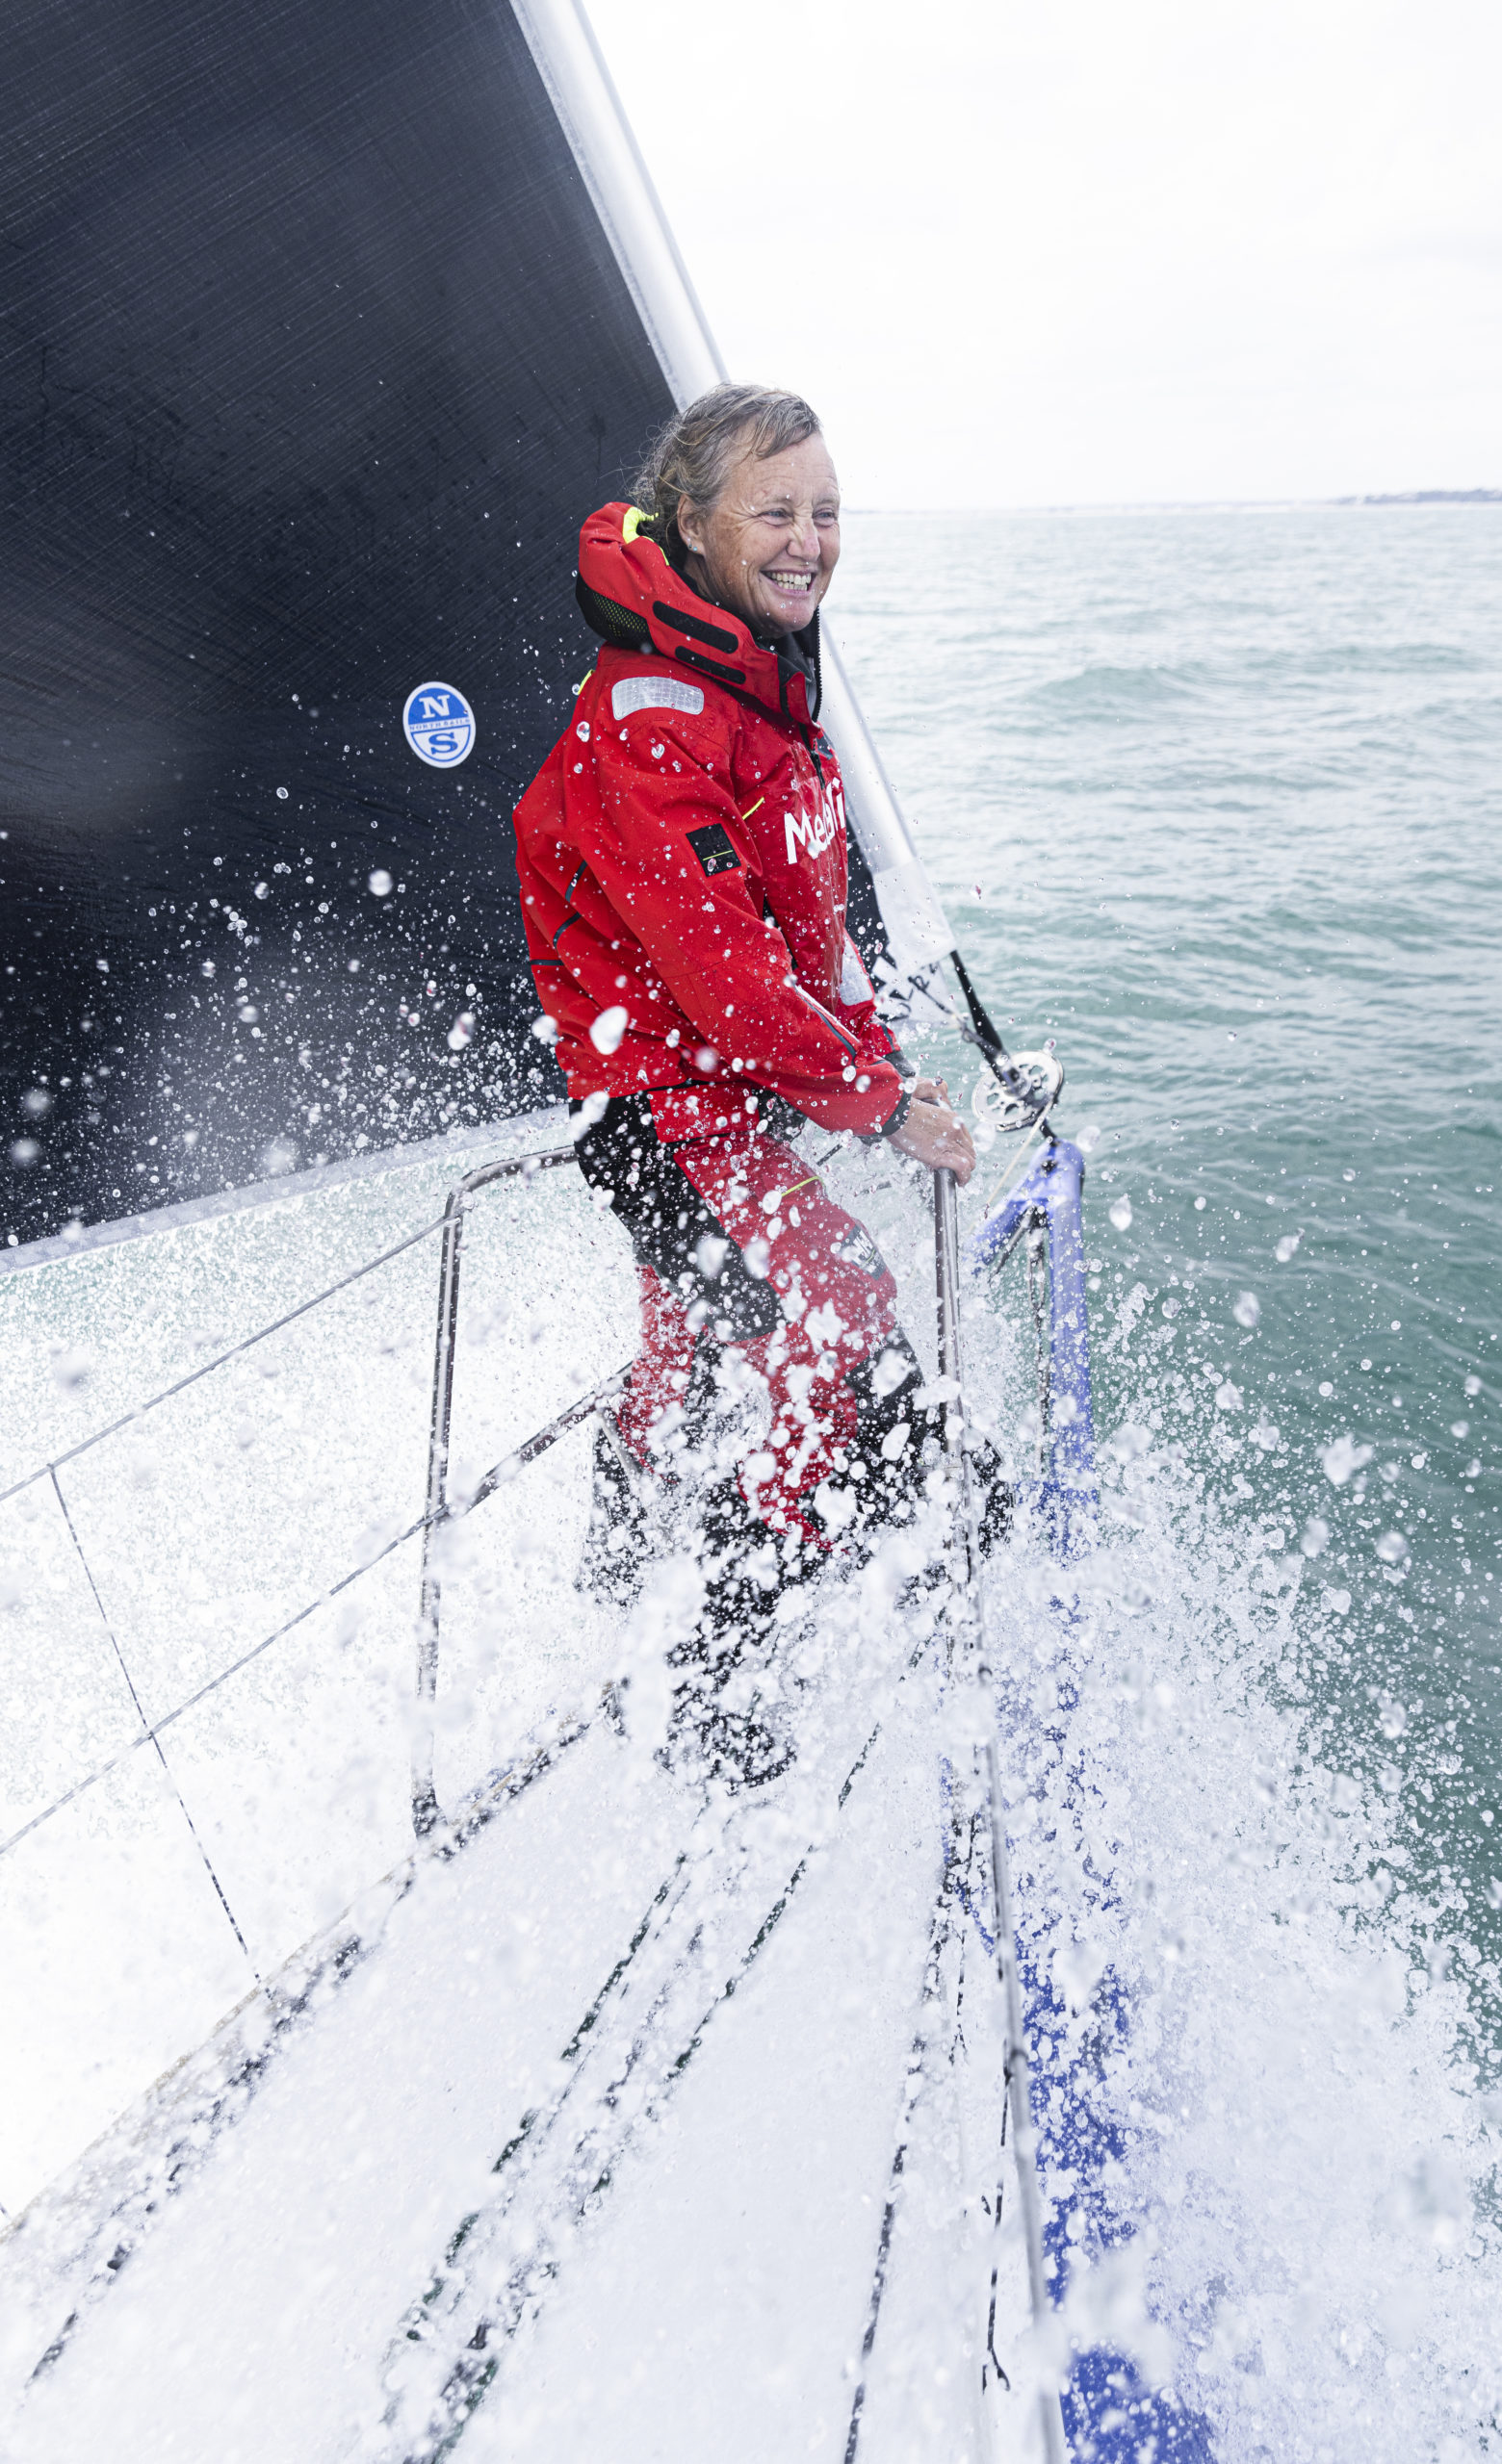 Inspirational Vendée Globe sailor, Pip Hare encourages the community to join in the Bournemouth Bay Run and raise funds for Lewis-Manning Hospice Care!